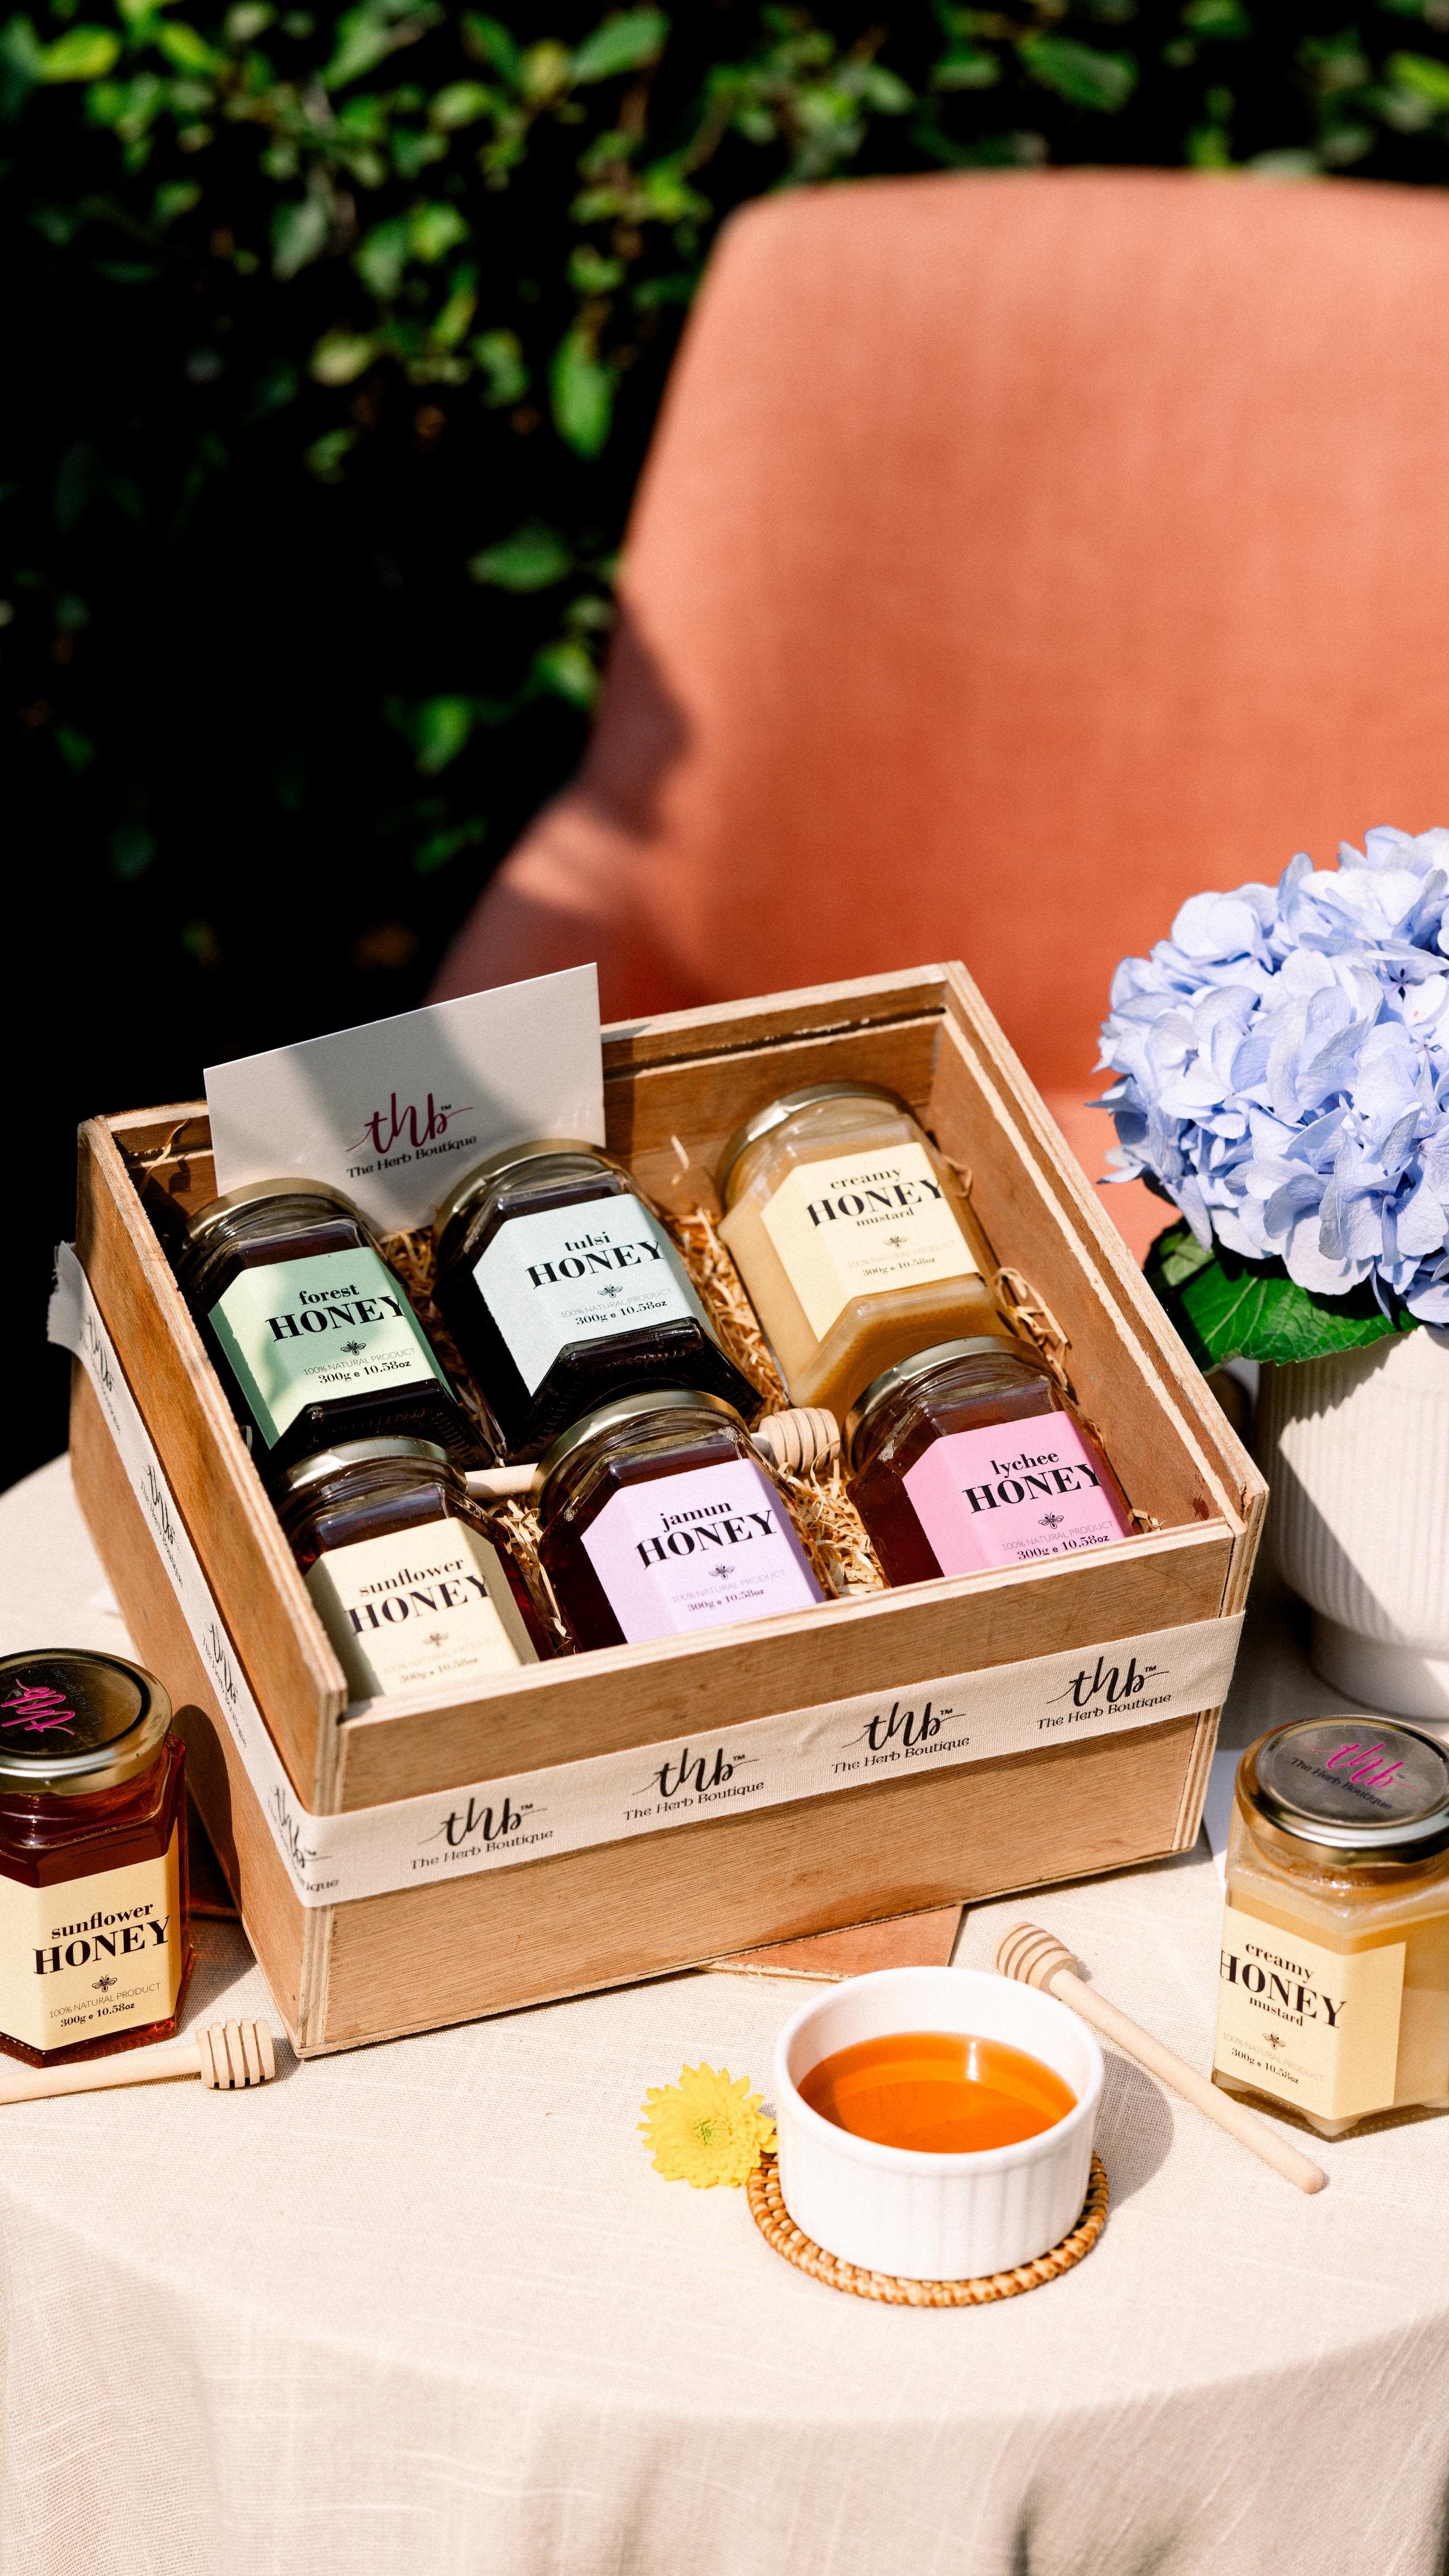 The Herb Boutique Honey Love Box